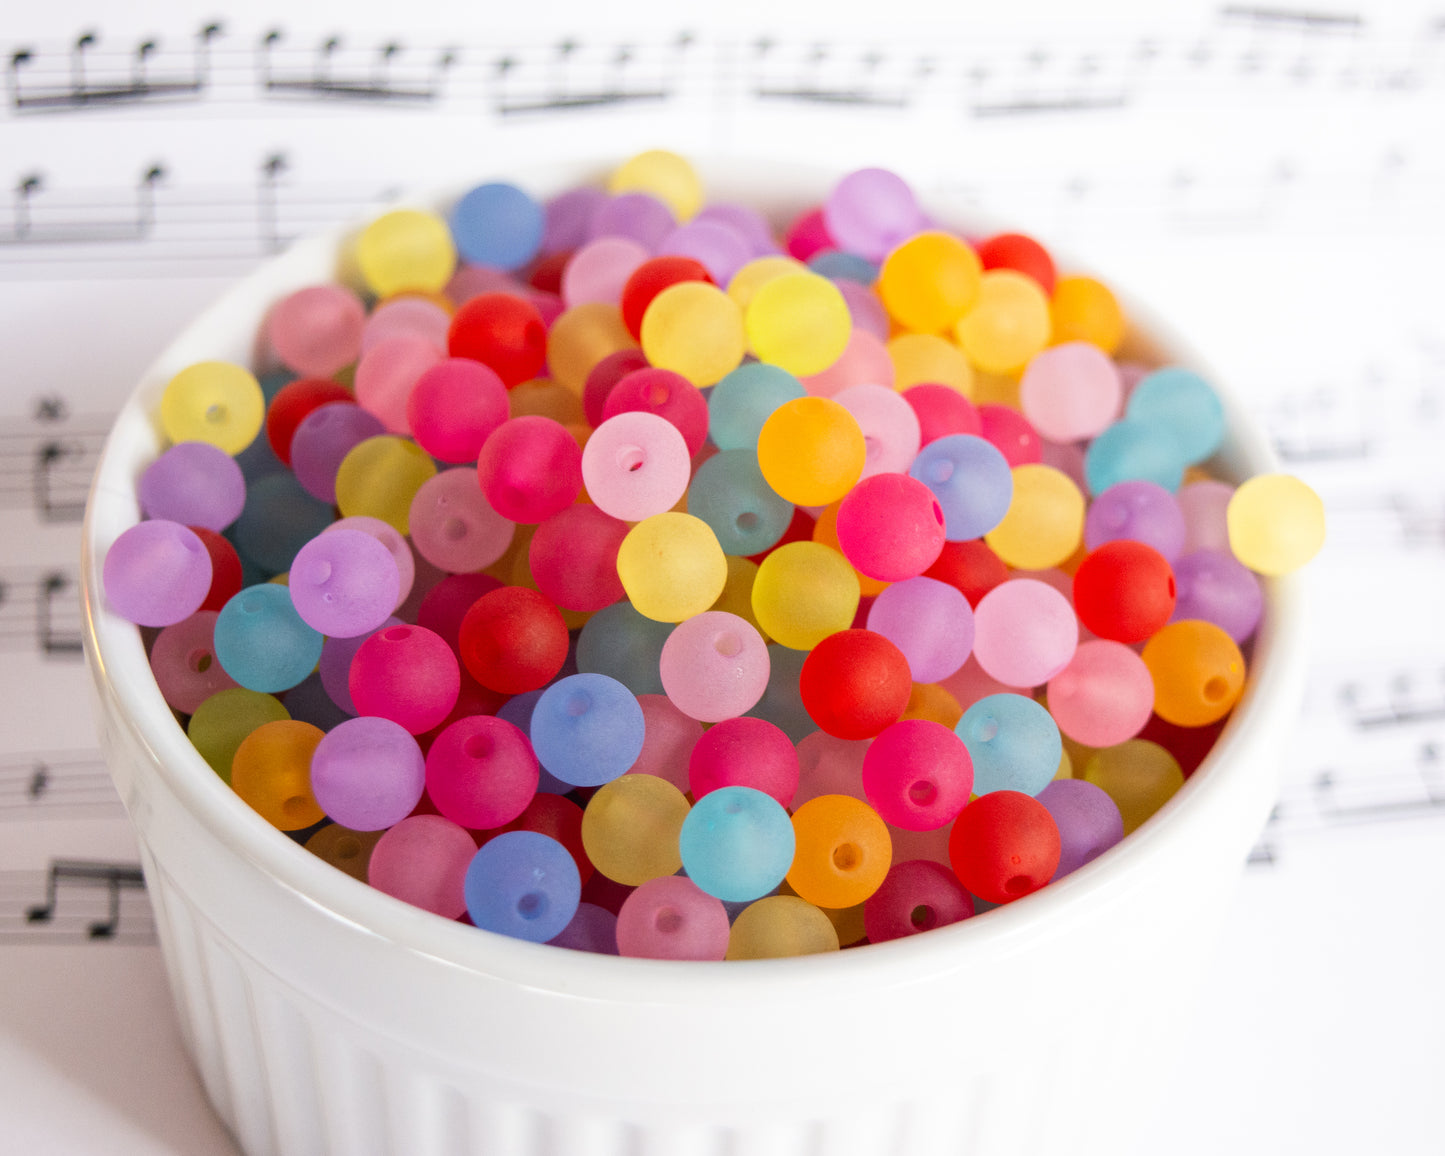 8mm Round Frosted Acrylic Beads in Pretty Colors, Lightweight For Jewelry and Crafts